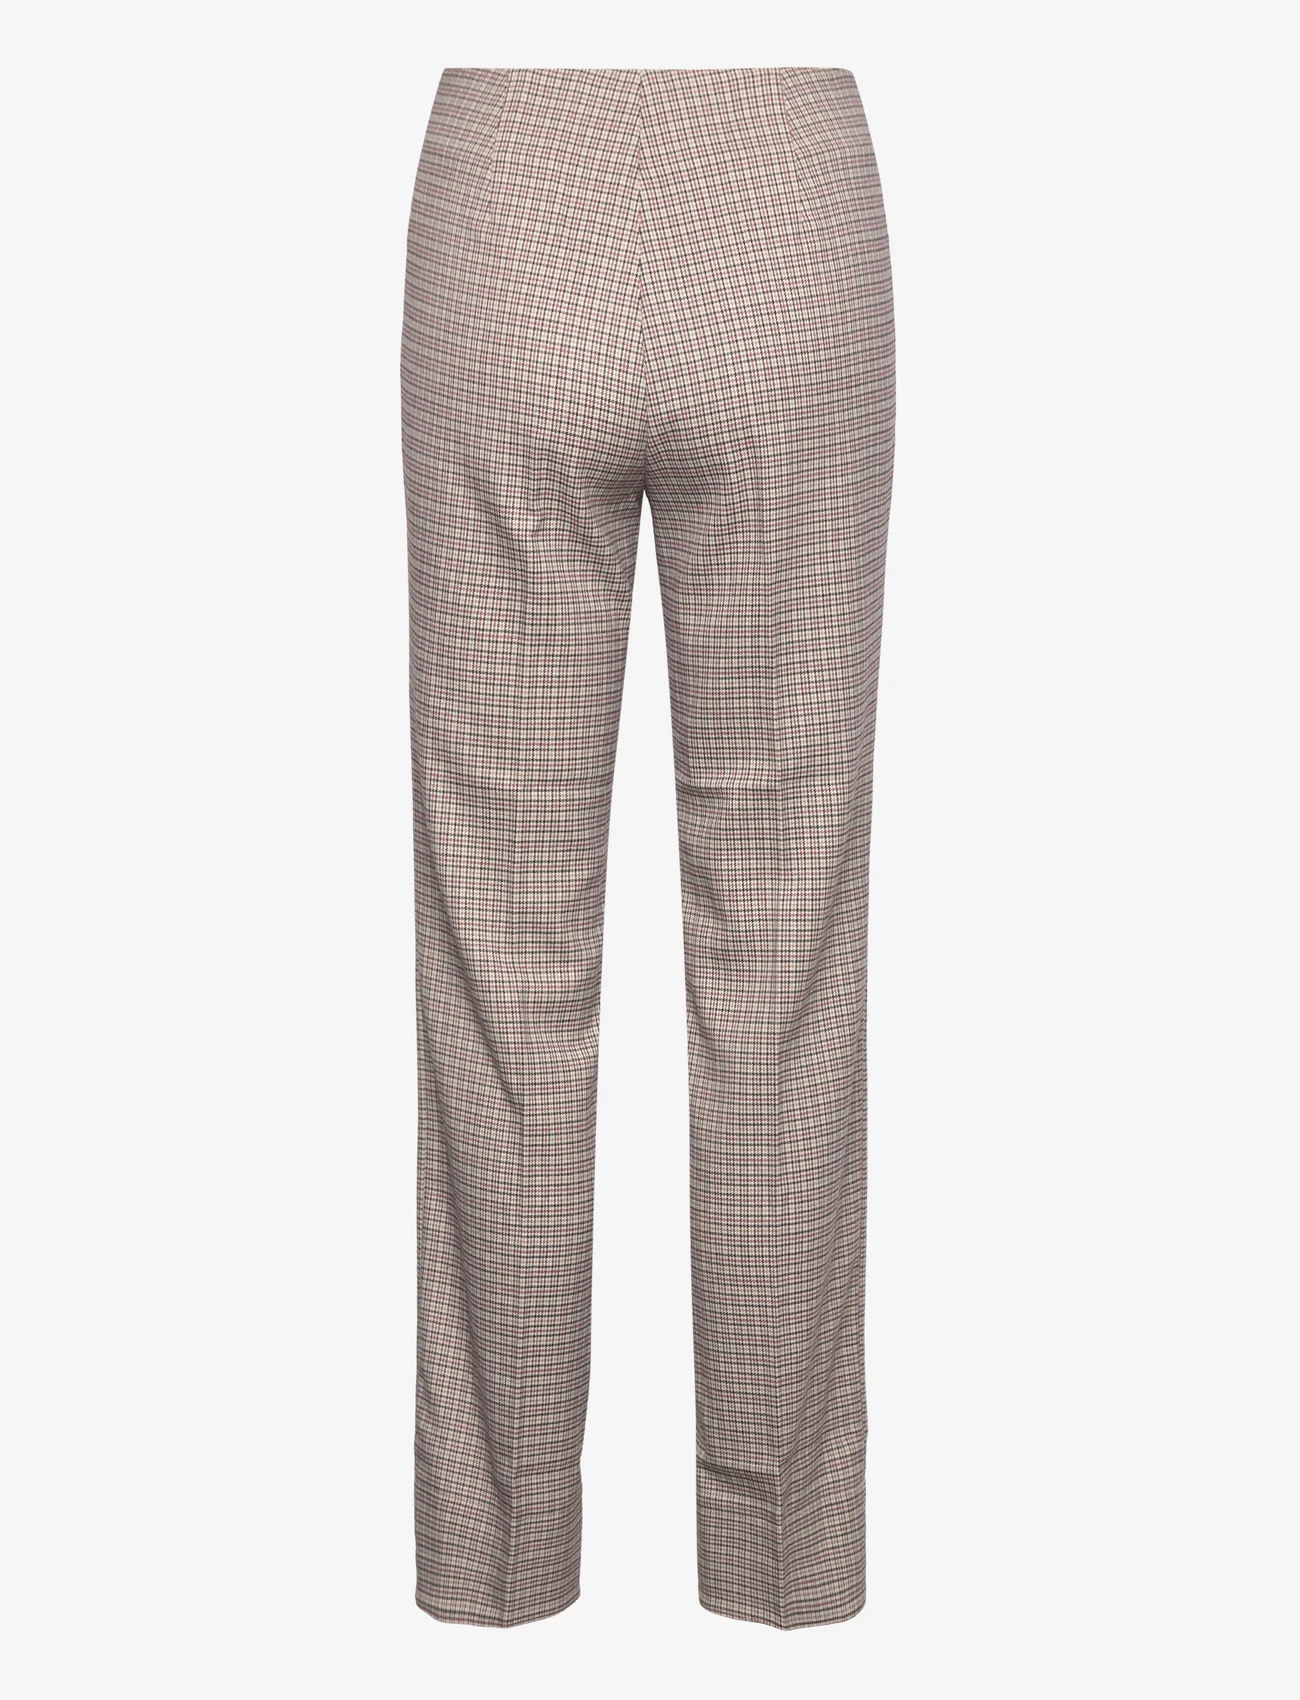 Notes du Nord - Emia Pants - slim fit-byxor - checked - 1